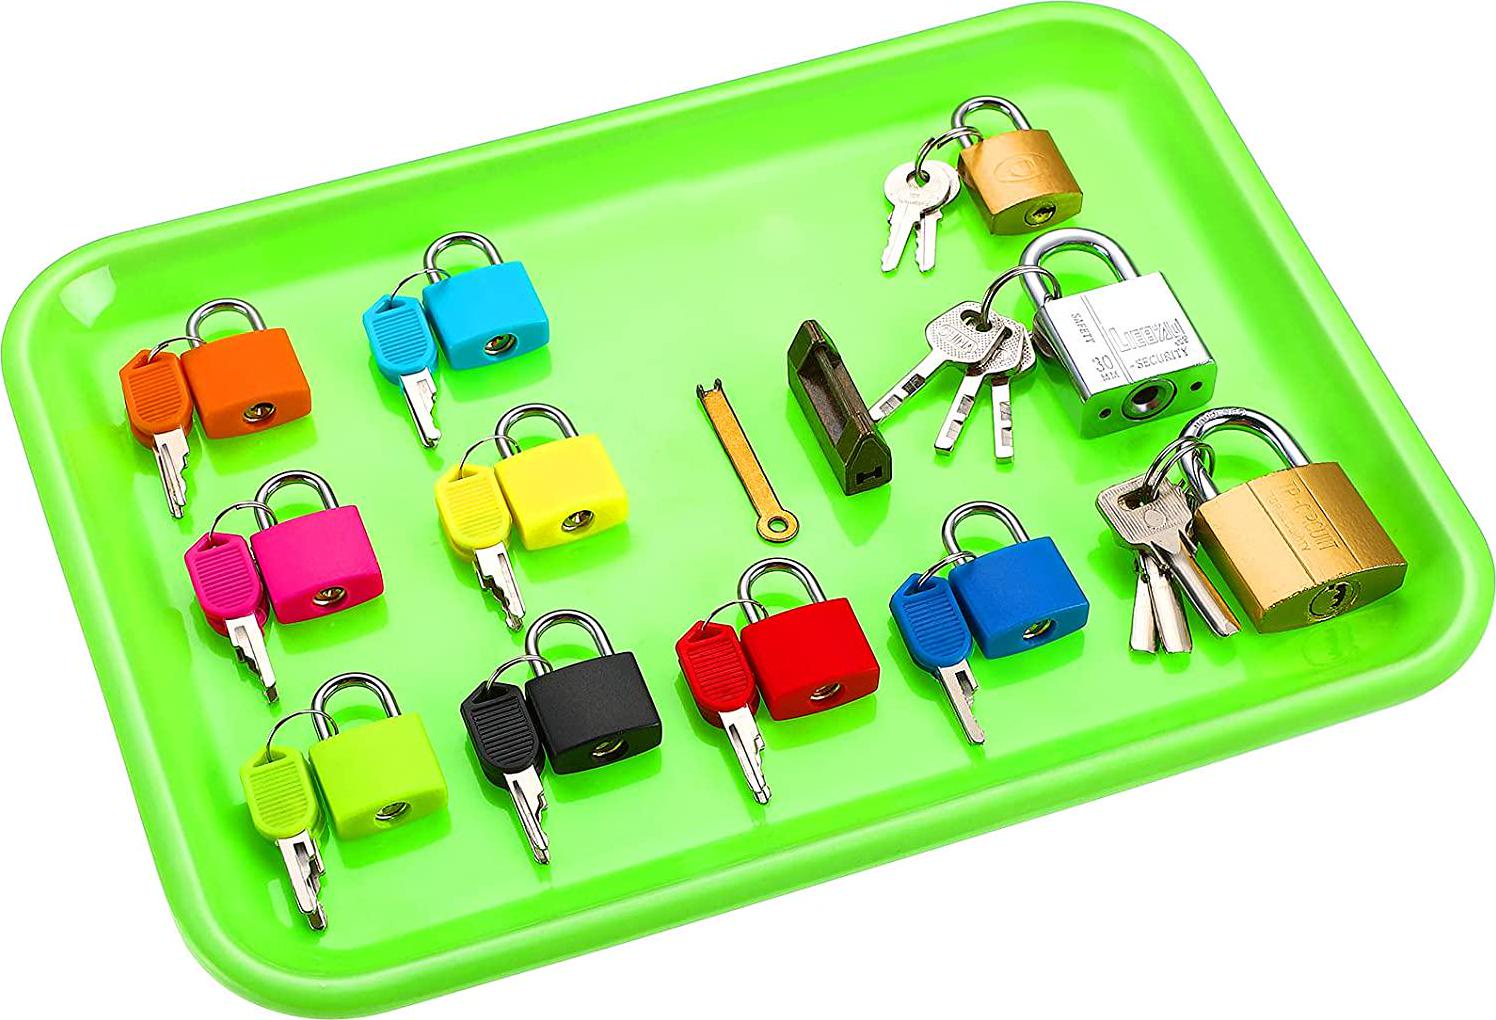 Sumind, Matching Games Lock Set Toy Lock and Key Set Color Montessori Locks Early Learning Preschool Educational Toys for Pupils Students